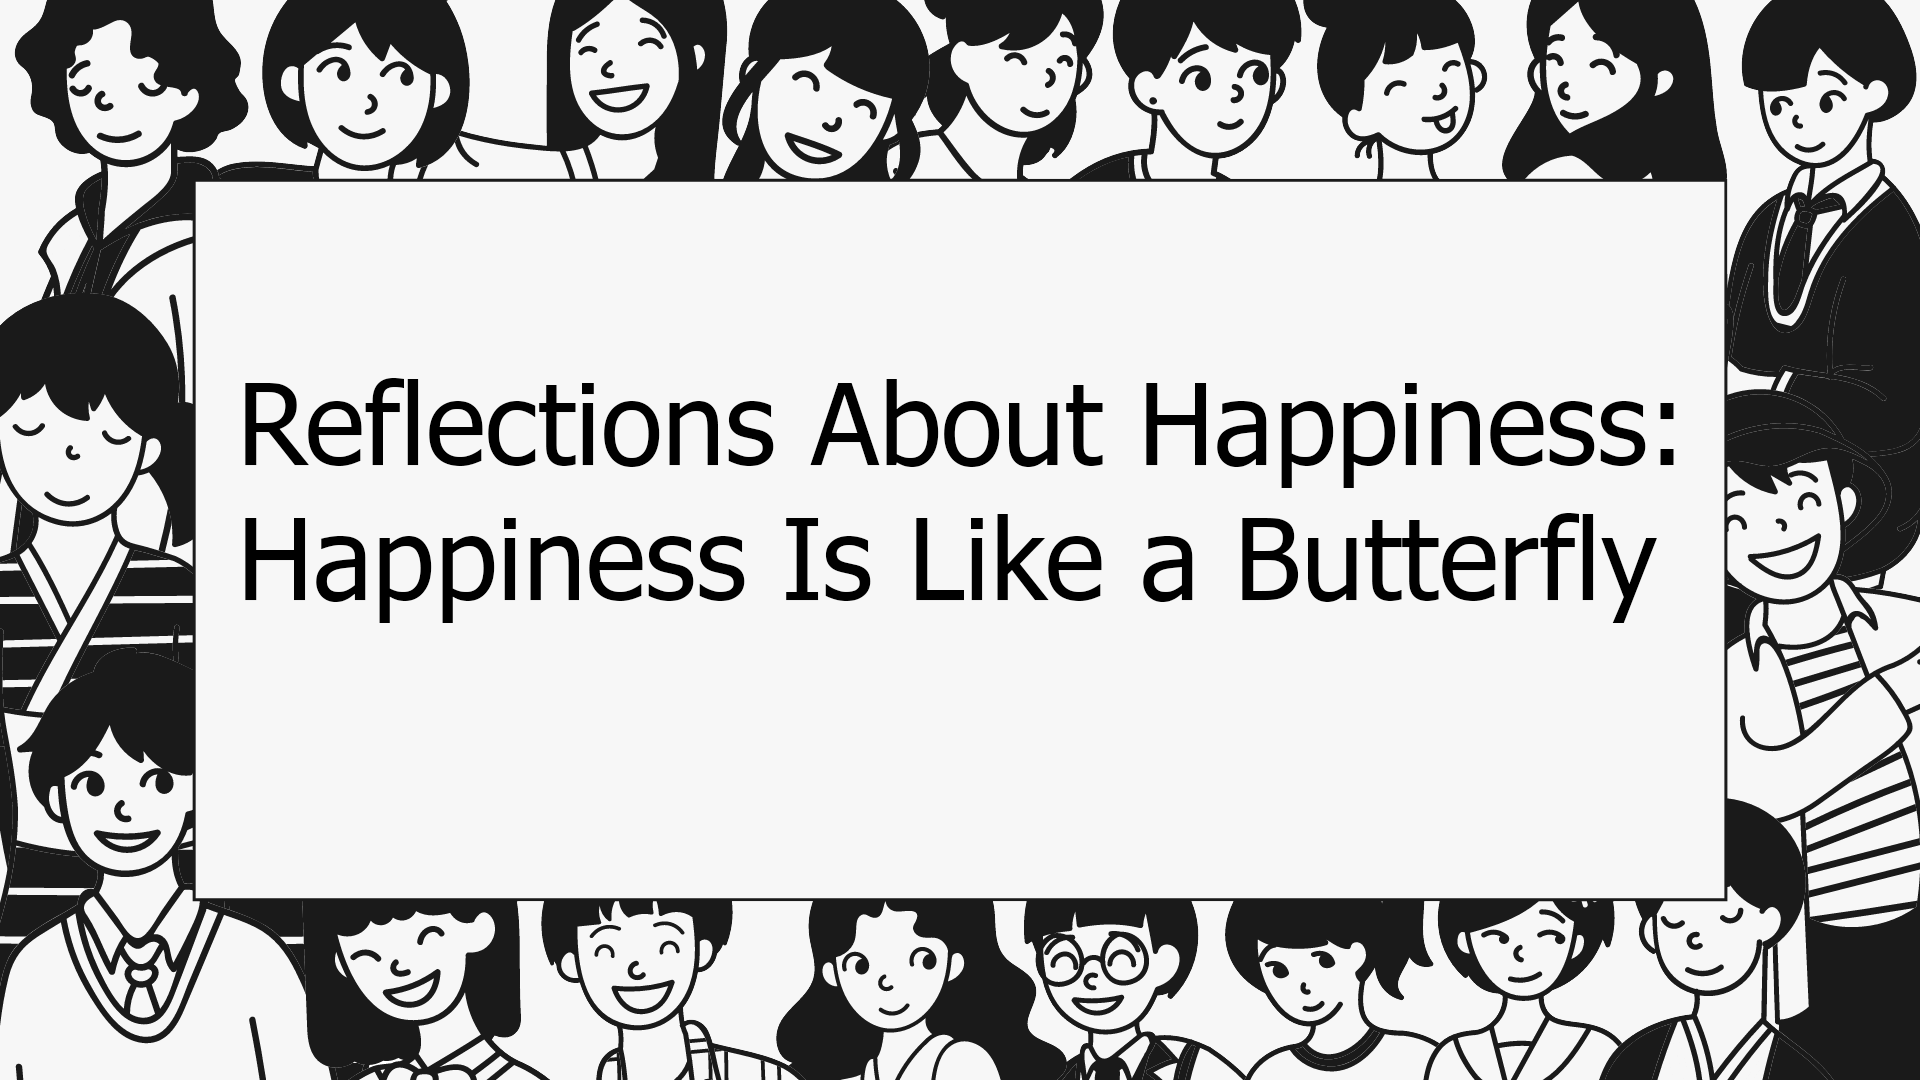 Reflections About Happiness: Happiness Is Like a Butterfly